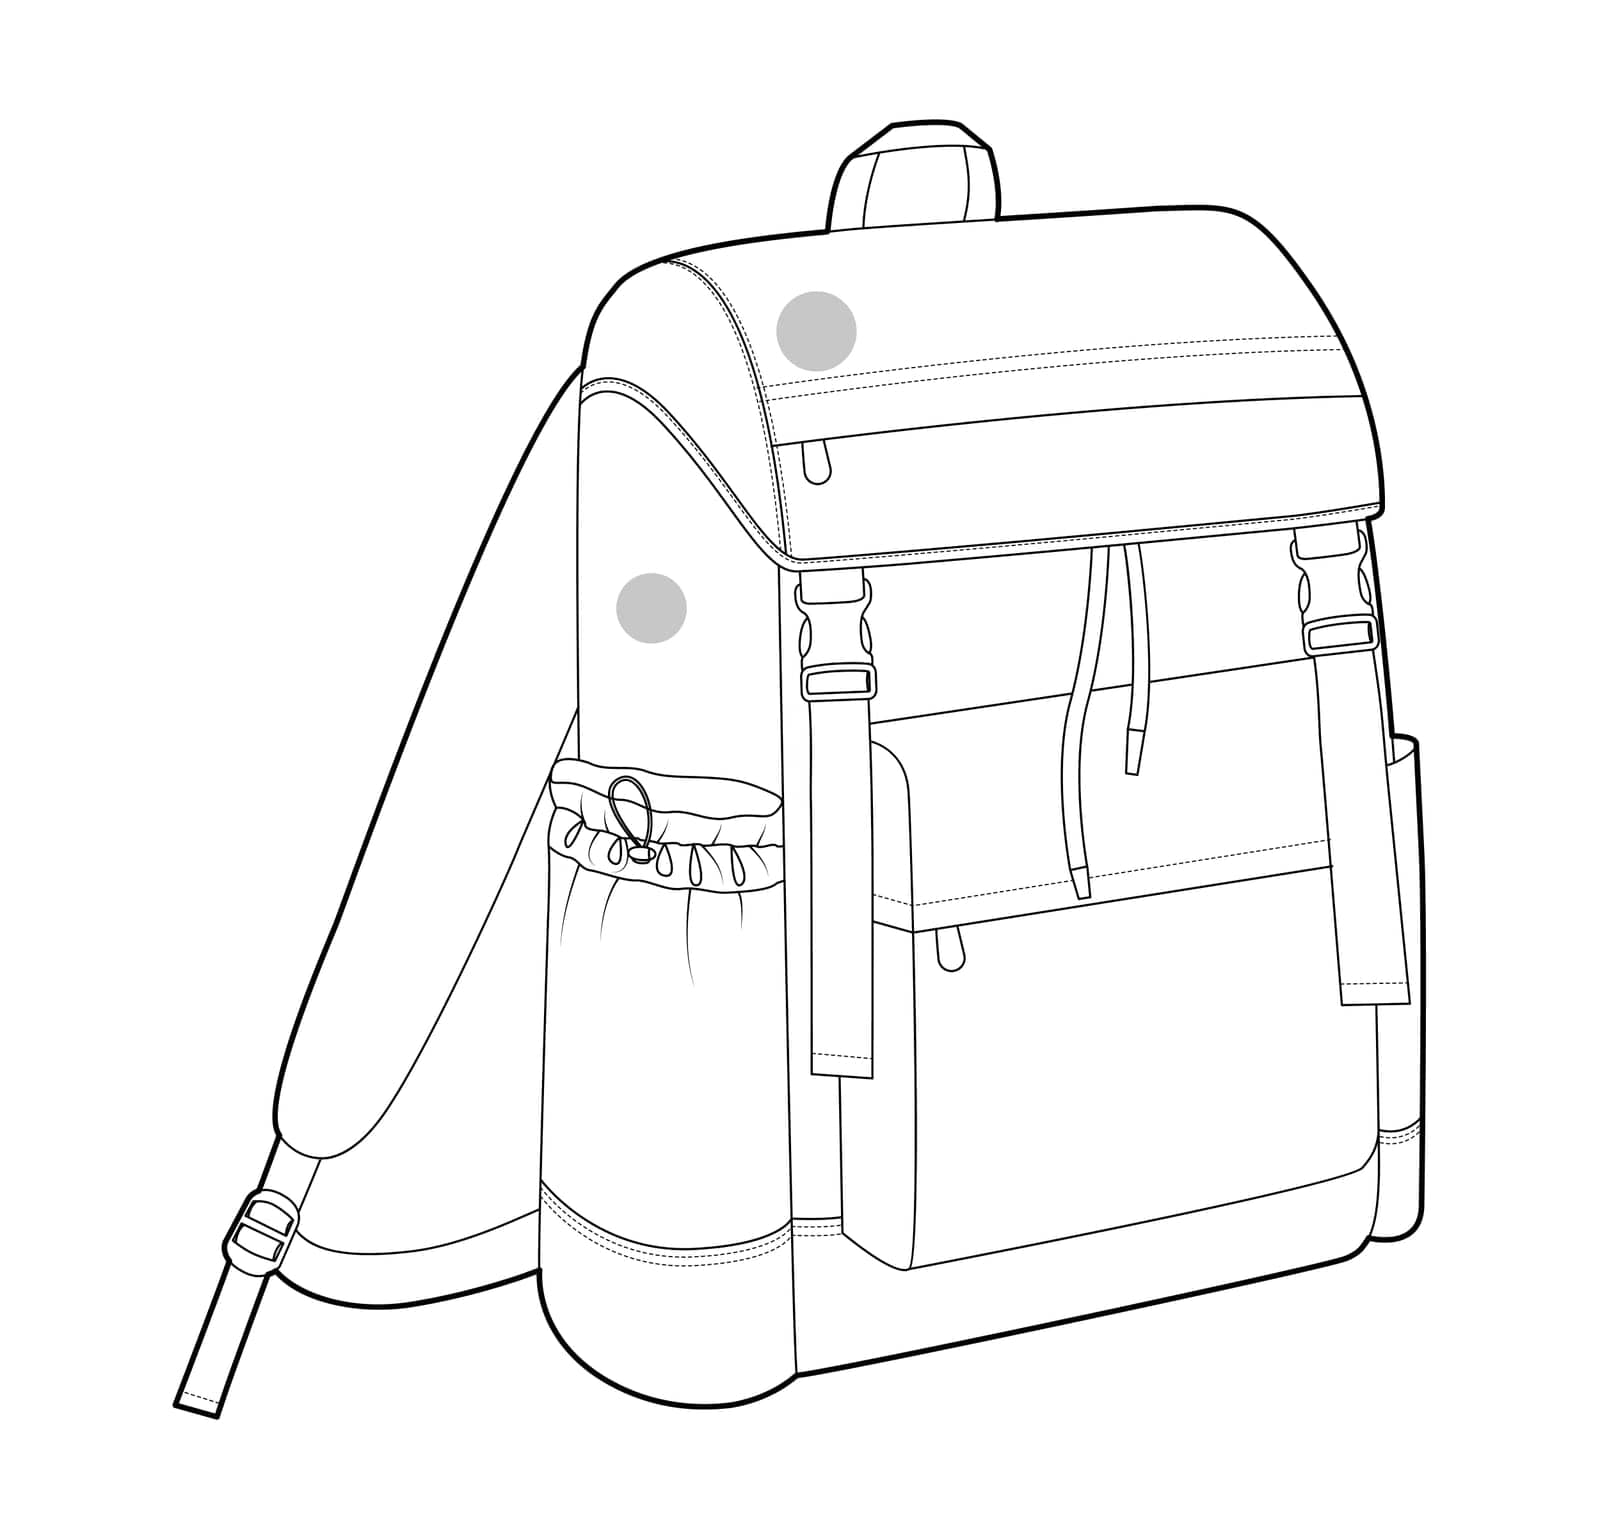 Adventure backpack silhouette bag. Fashion accessory technical illustration. Vector schoolbag 3-4 view for Men, women by Vectoressa